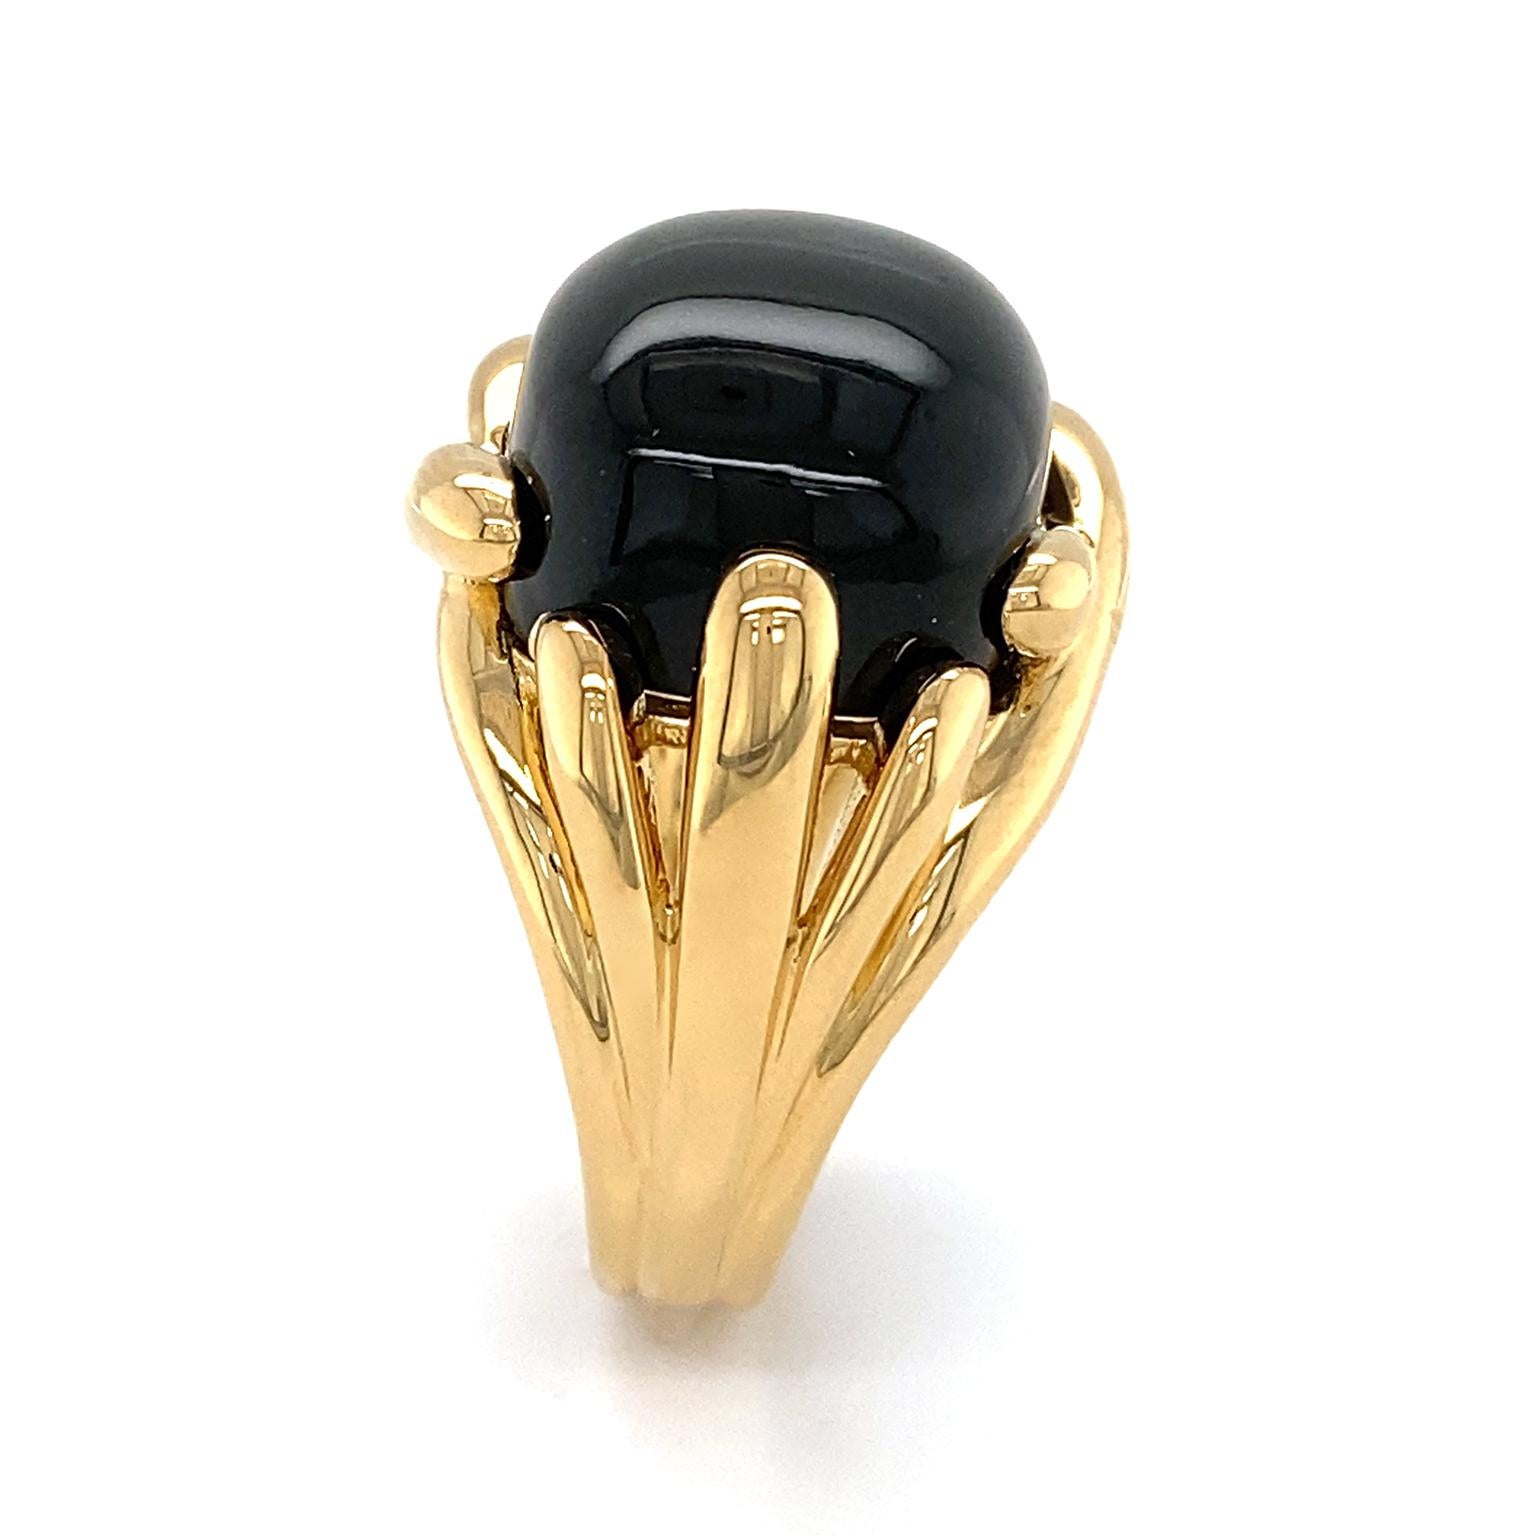 The striking opacity of black onyx is the summit of this ring. A cushion cabochon of the gem is further underlined by polished 18k yellow gold. Fluted tips of the metal overlap to surround the gem and descend into a multi-split shank. The total